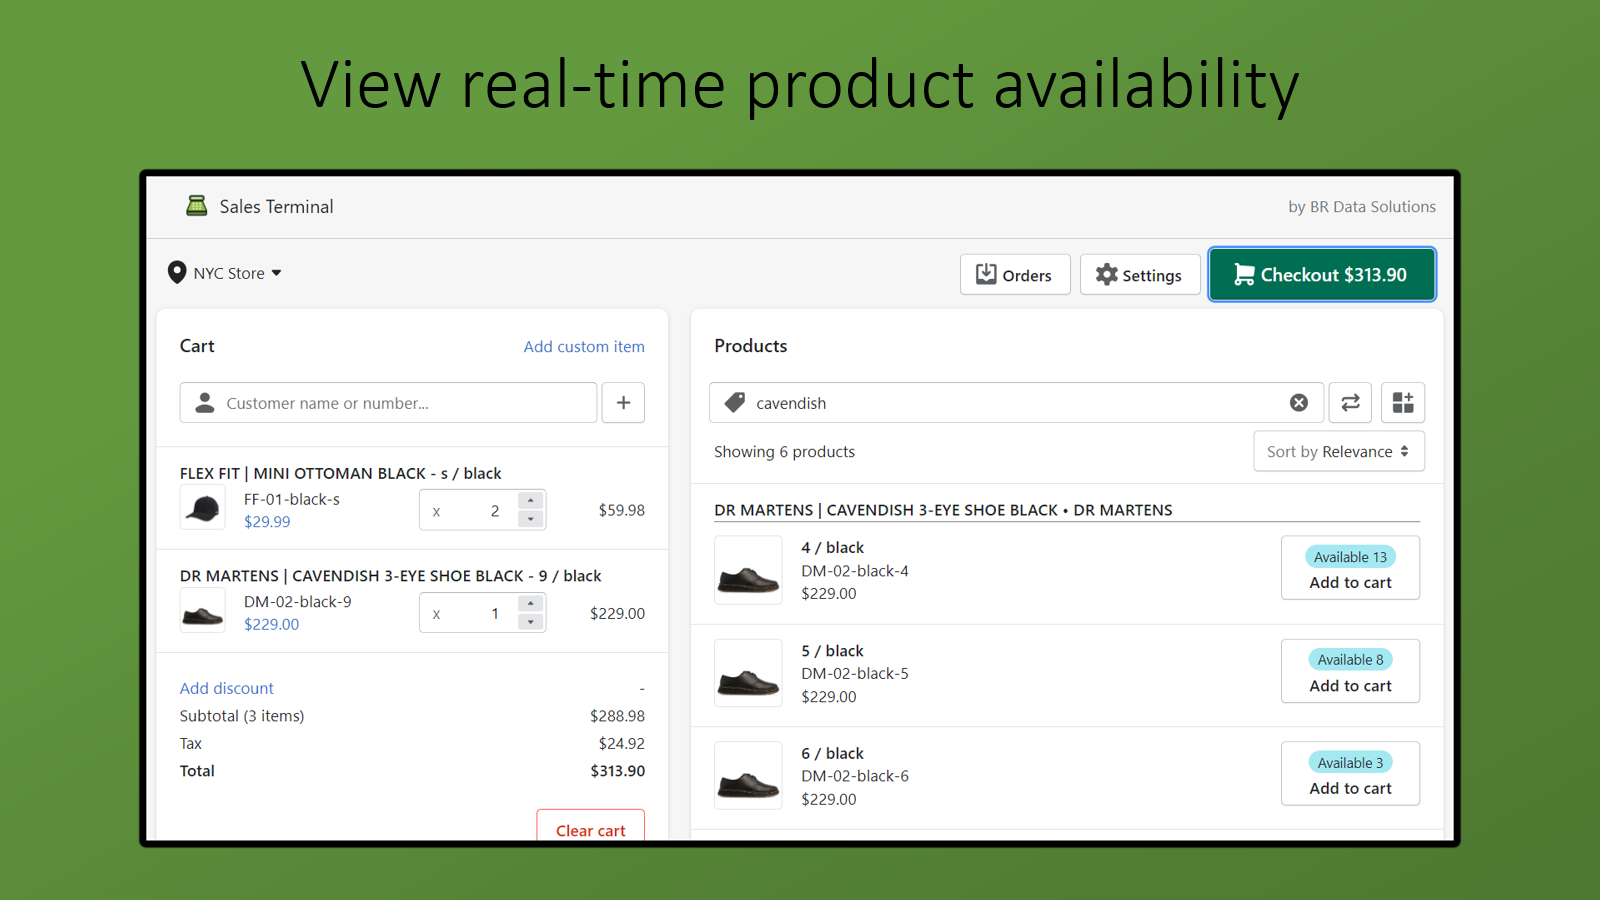 View real-time product availability and sort products